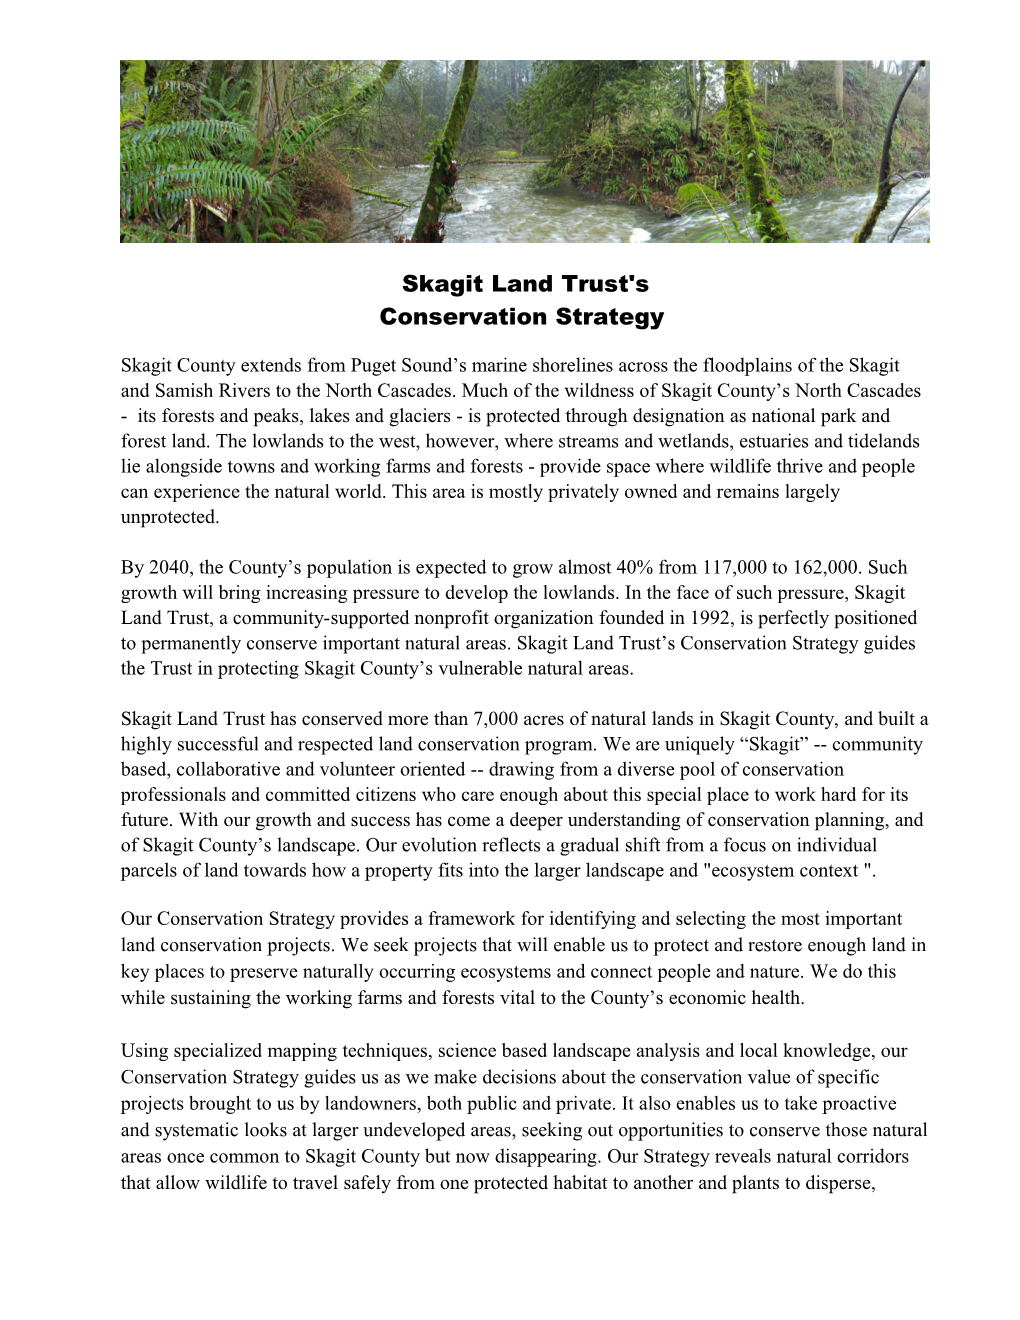 Conservation Strategy